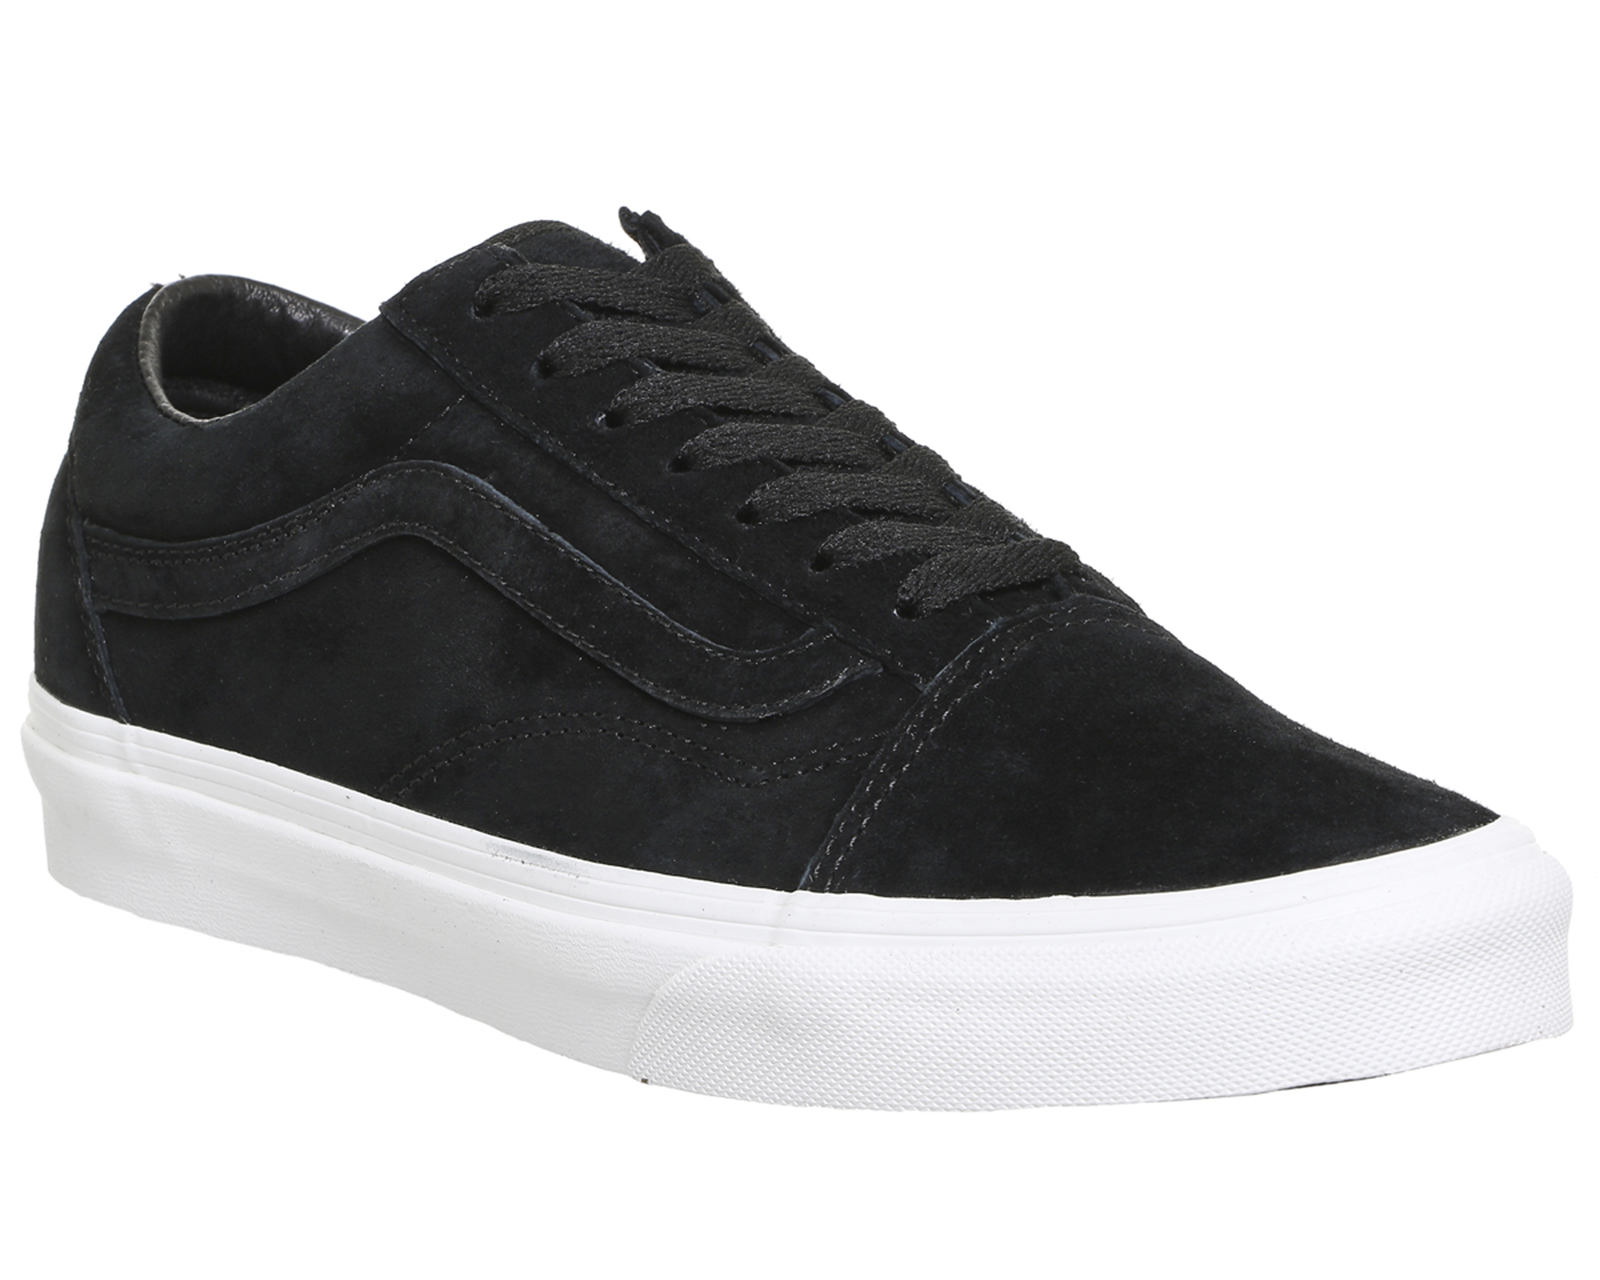 vans black and white suede